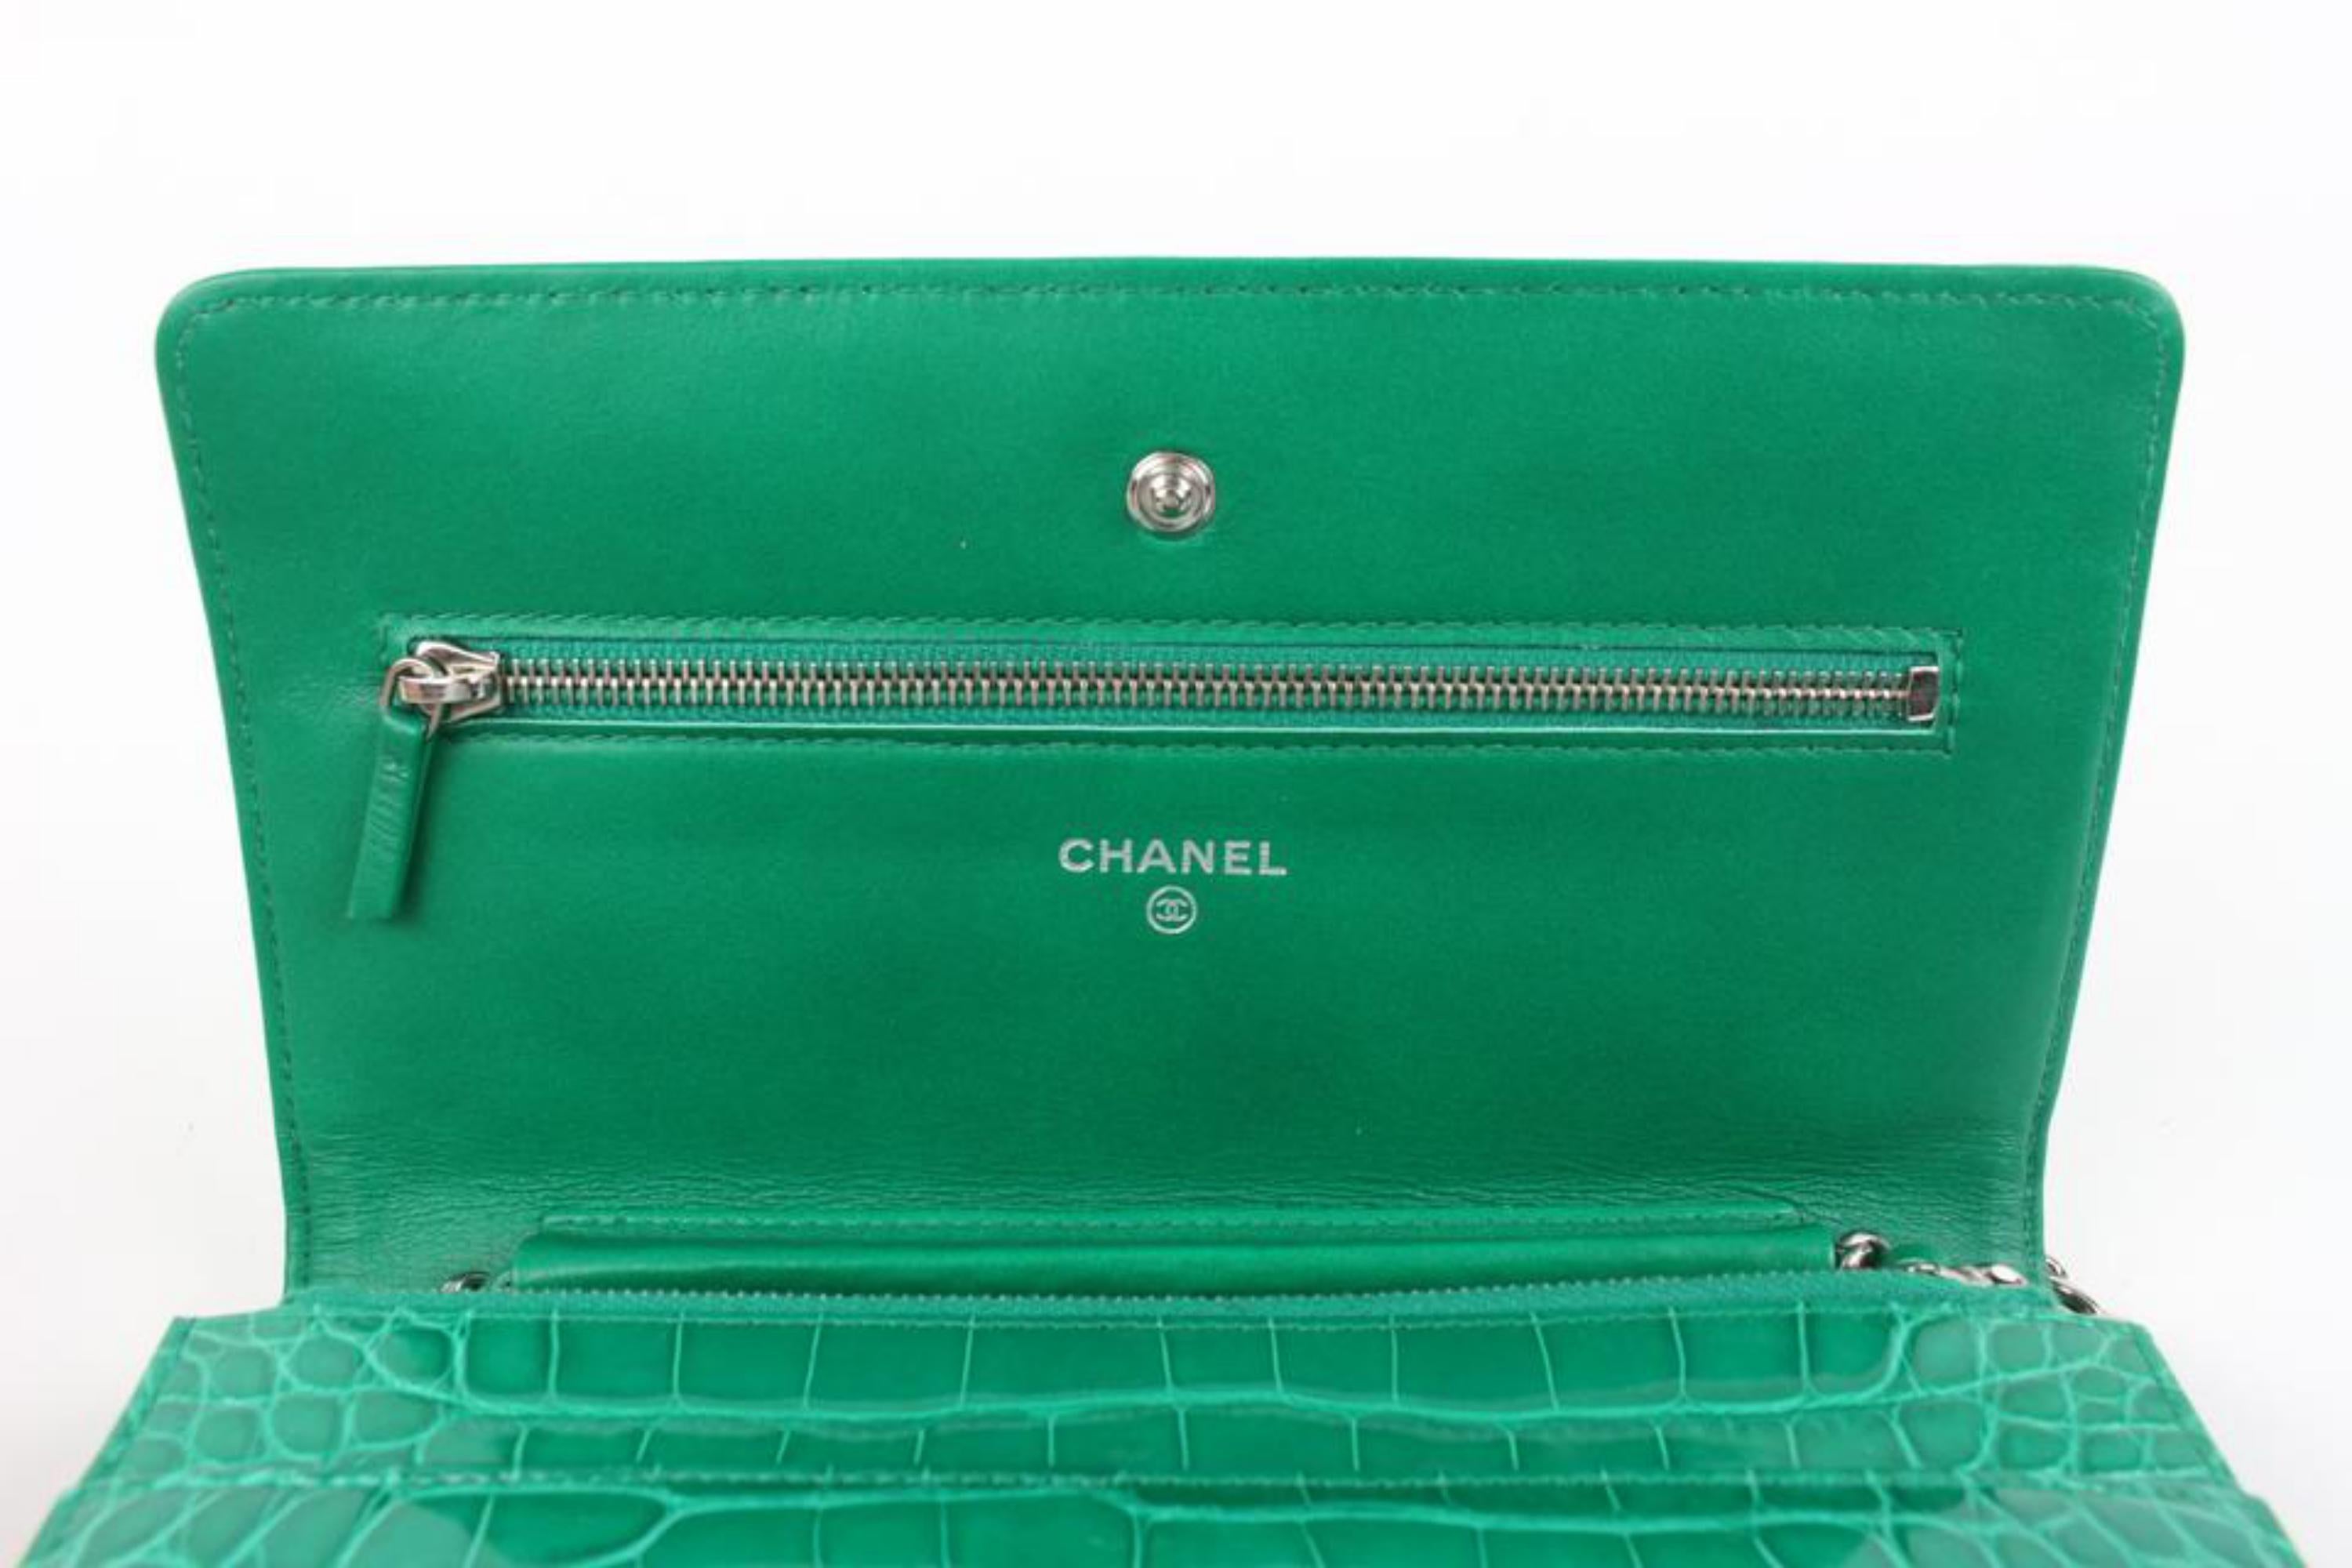 Chanel Ultra Rare Emerald Green Alligator Wallet on Chain SHW WOC 46cz414s For Sale 1